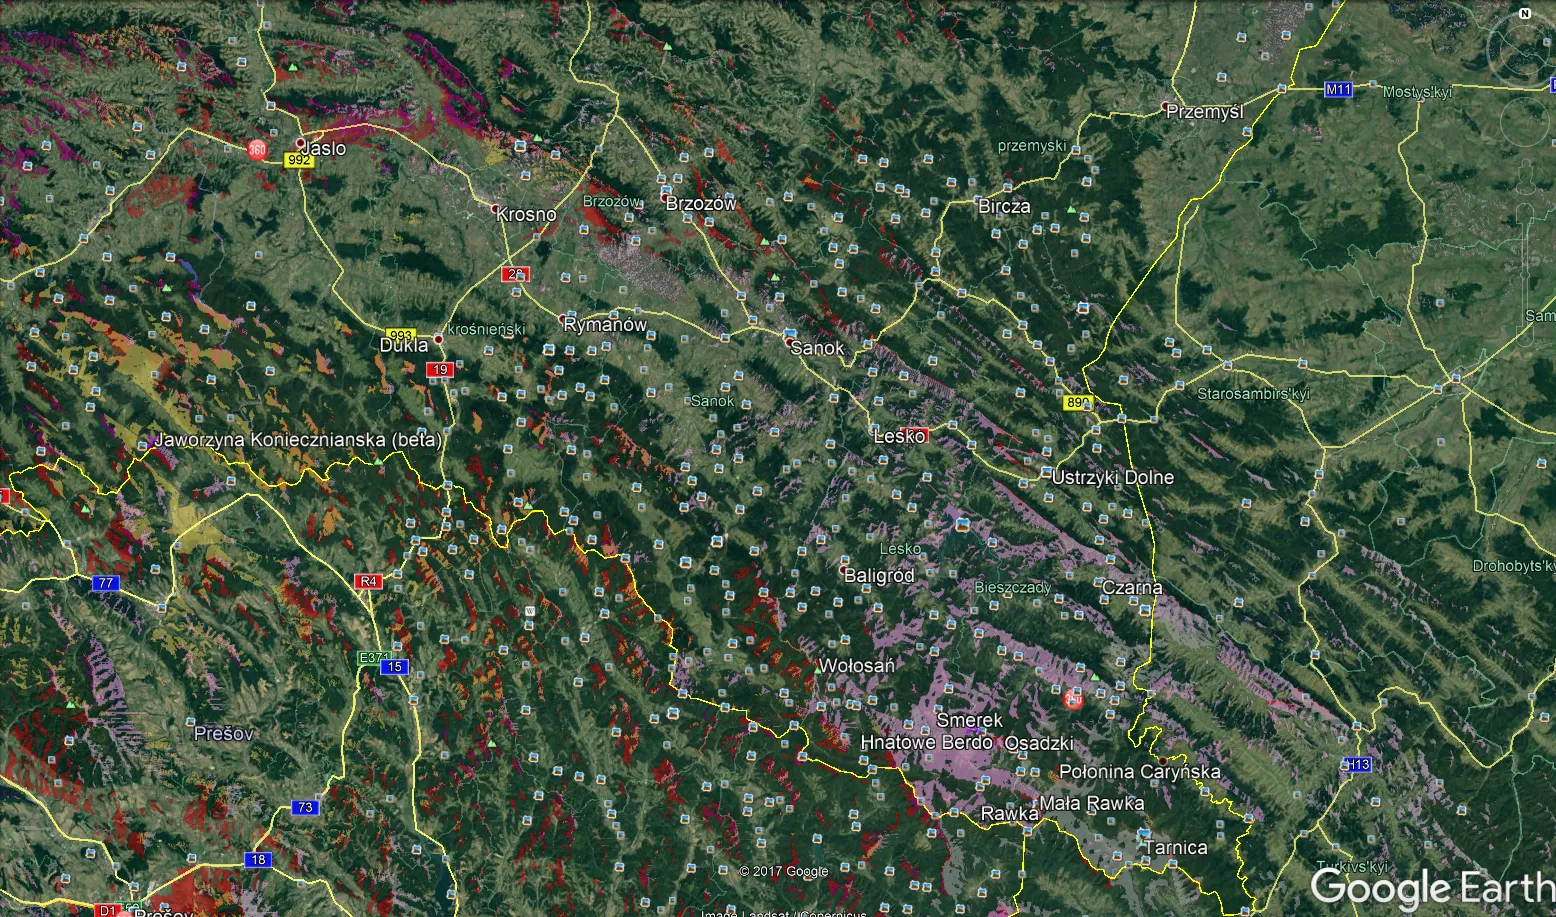 Heywhatsthat.com visibility cloak color modified seen on Google Earth, Bieszczady